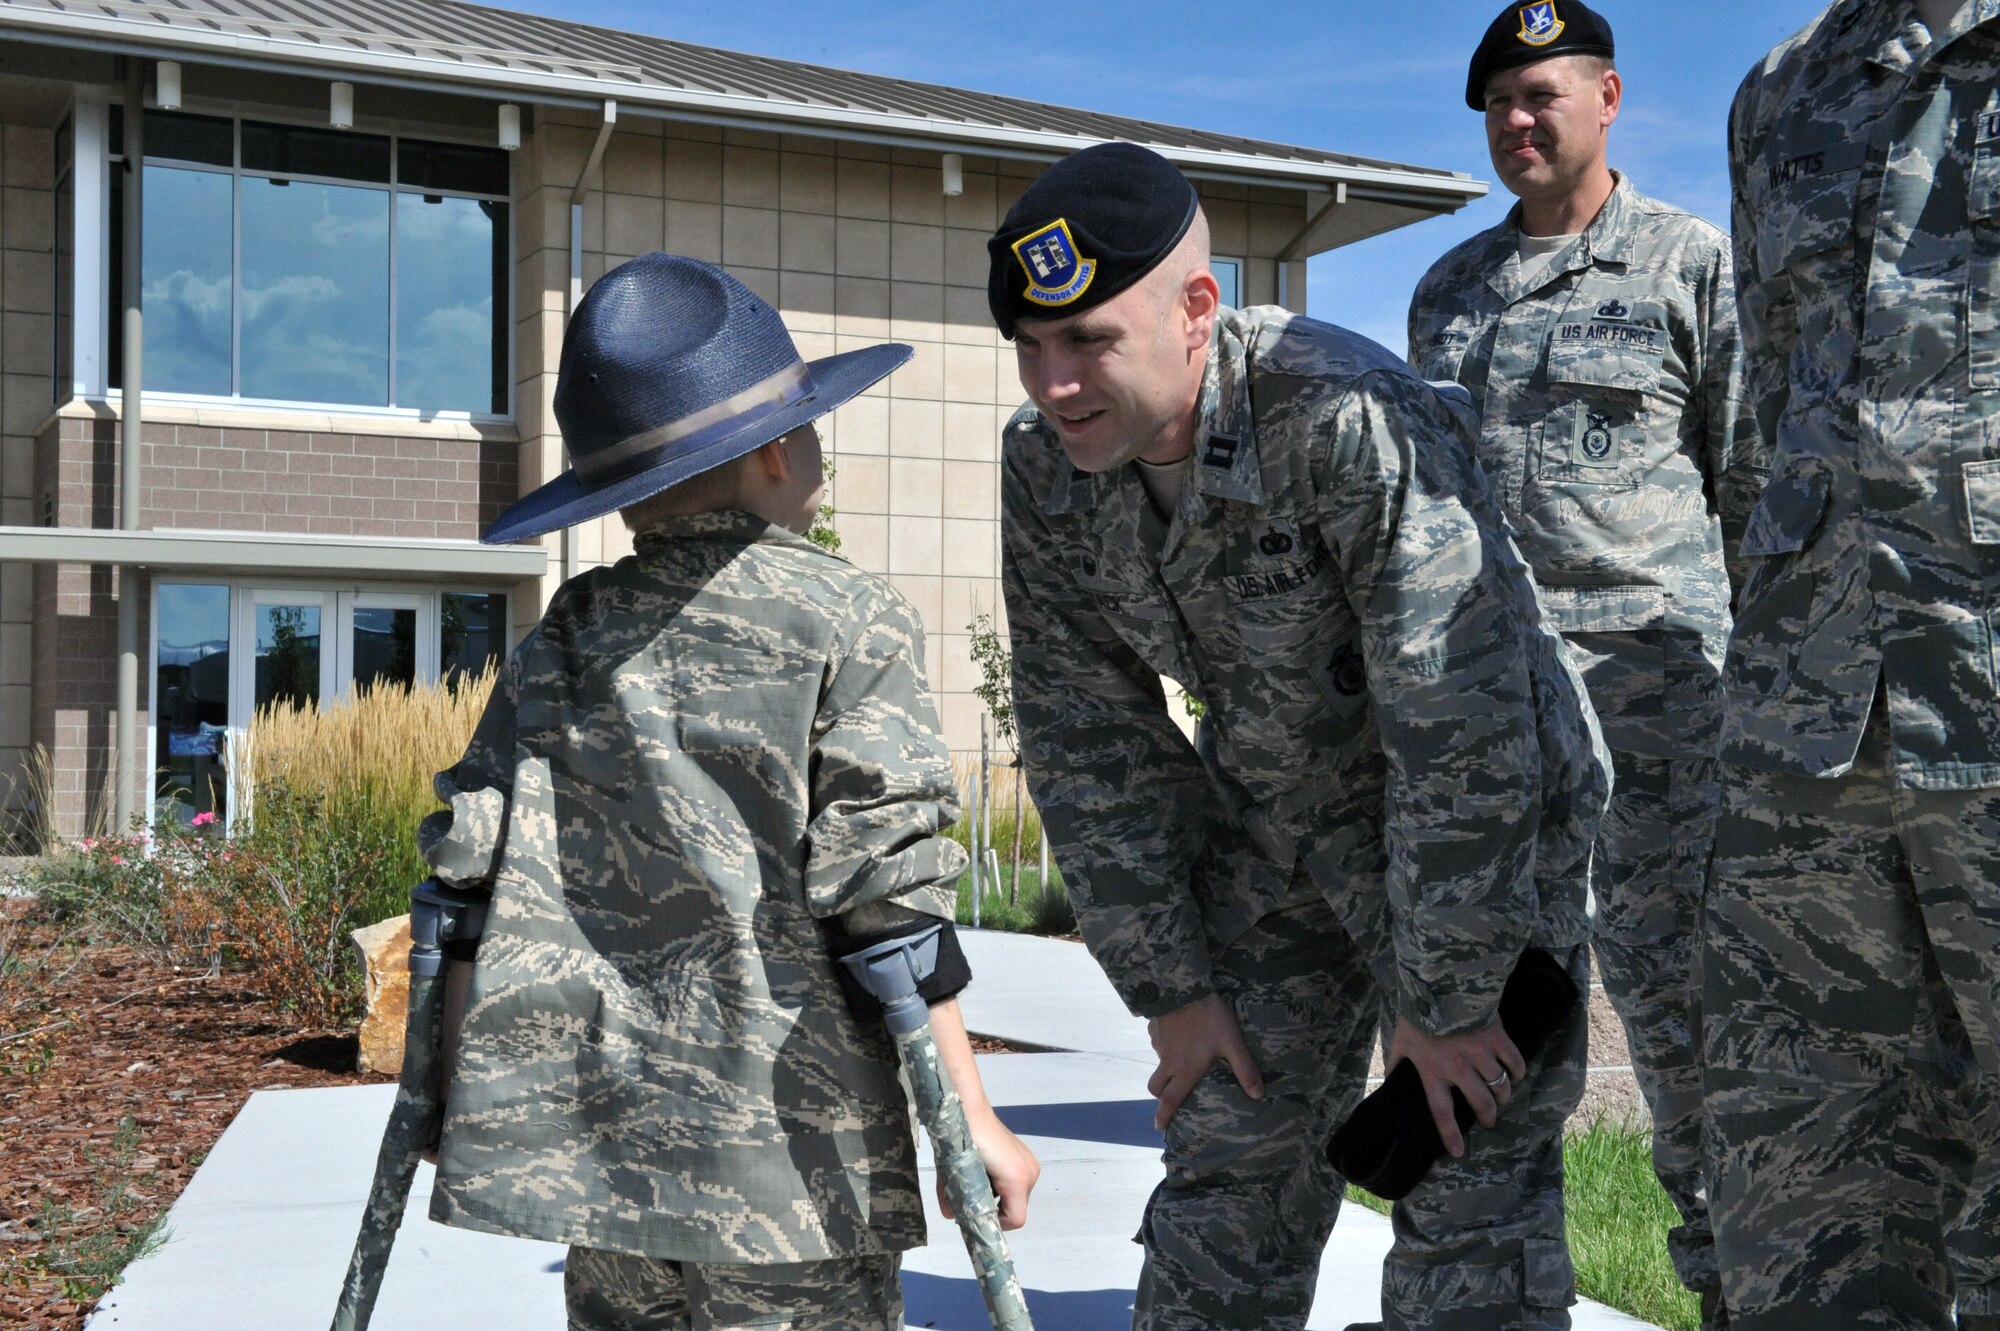 Keegan Stipe, left, a 7-year-old boy who is overcoming transverse myelitis, a spinal condition that limits his ability to walk, is greeted by Capt. Jason Stack, 460th Security Forces Squadron commander, second from left, and other security forces members during his Airman for a Day base tour Aug. 26, 2014, on Buckley Air Force Base, Colo. Keegan has always been fascinated with fast planes, loud guns and the military lifestyle, so the 460th Space Wing gave him and his parents the opportunity to visit the base. On his tour, he visited the 140th Wing, Air National Guard and various 460th SFS sections. (U.S. Air Force photo by Airman Emily E. Amyotte/Released)